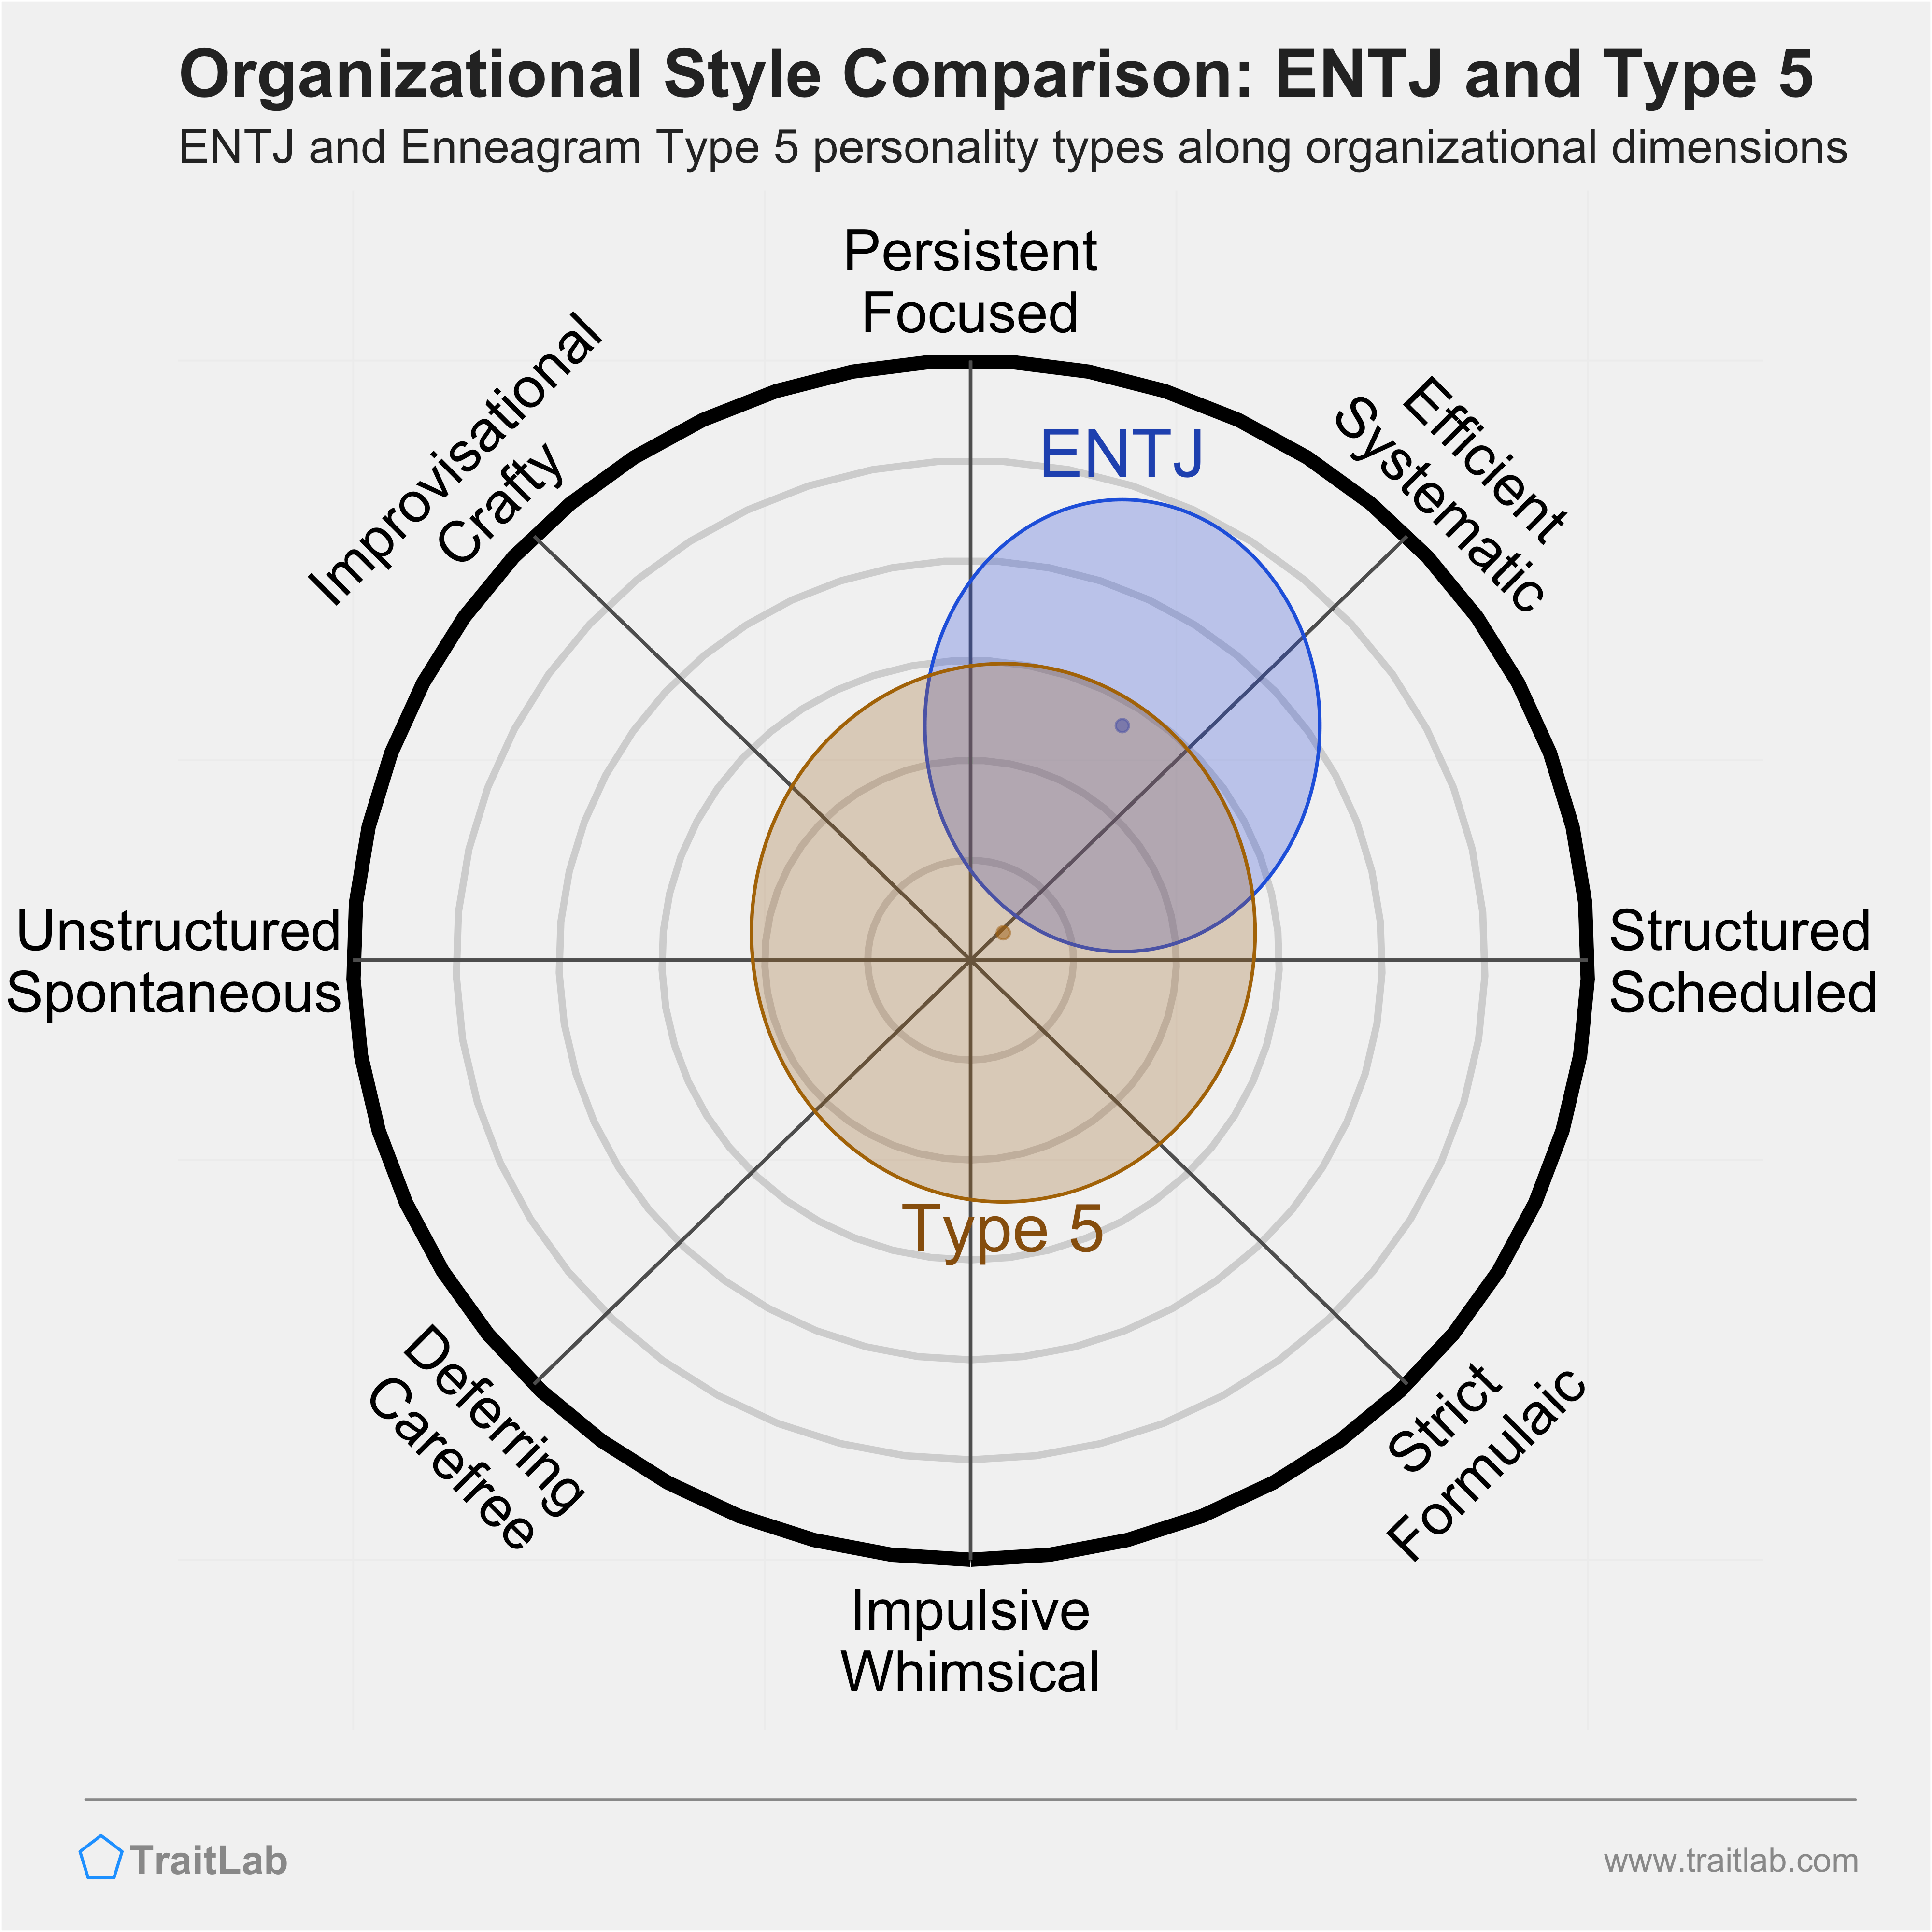 ENTJ and Type 5 comparison across organizational dimensions